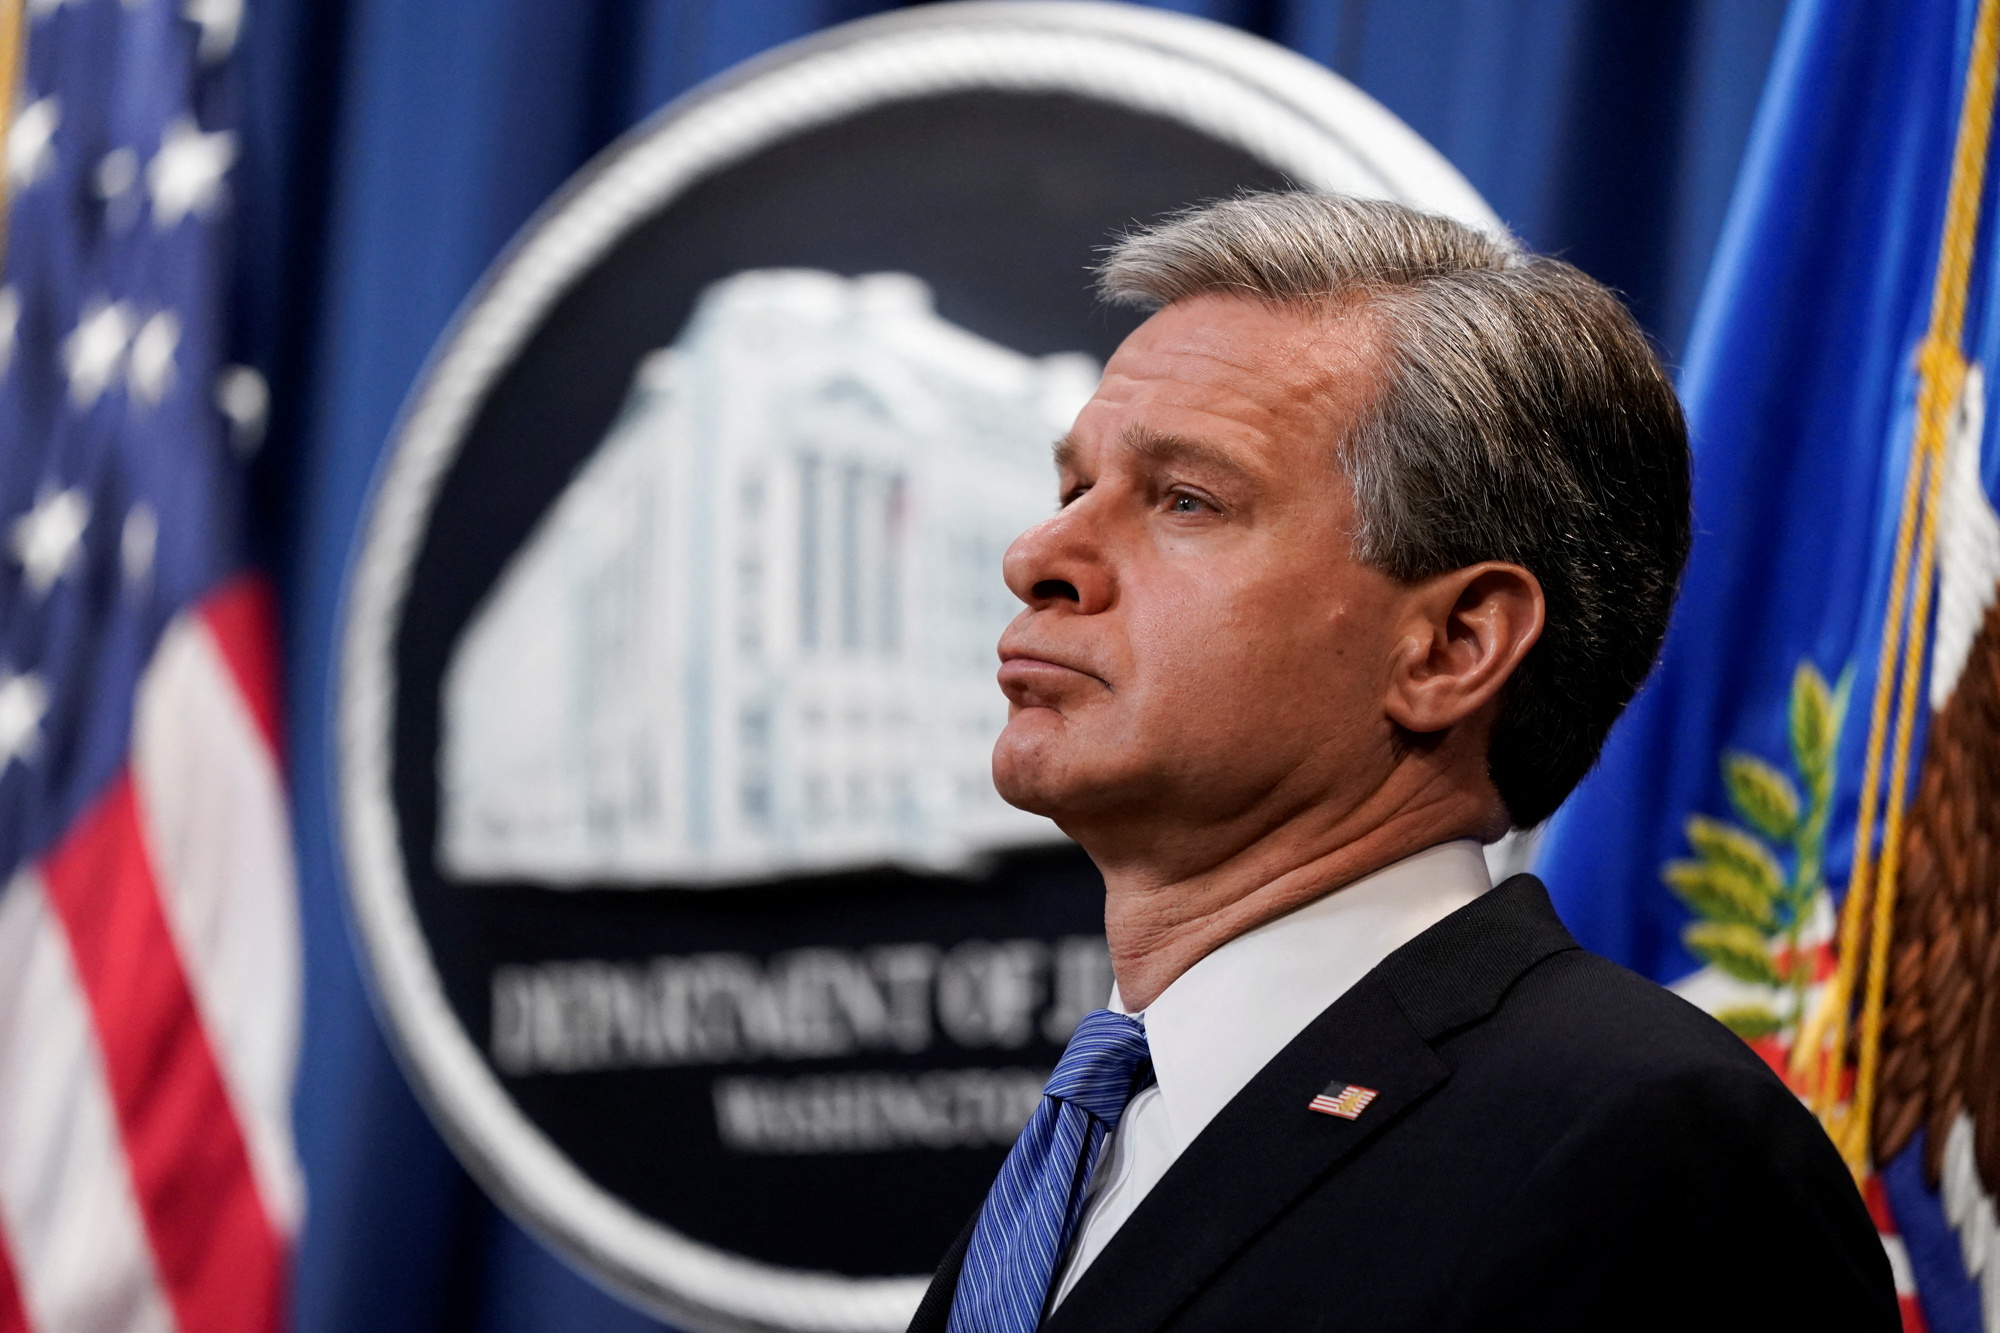 The director of the FBI, Christopher Wray, in the Department of Justice in Washington, United States, on April 6, 2022. REUTERS/Elizabeth Frantz